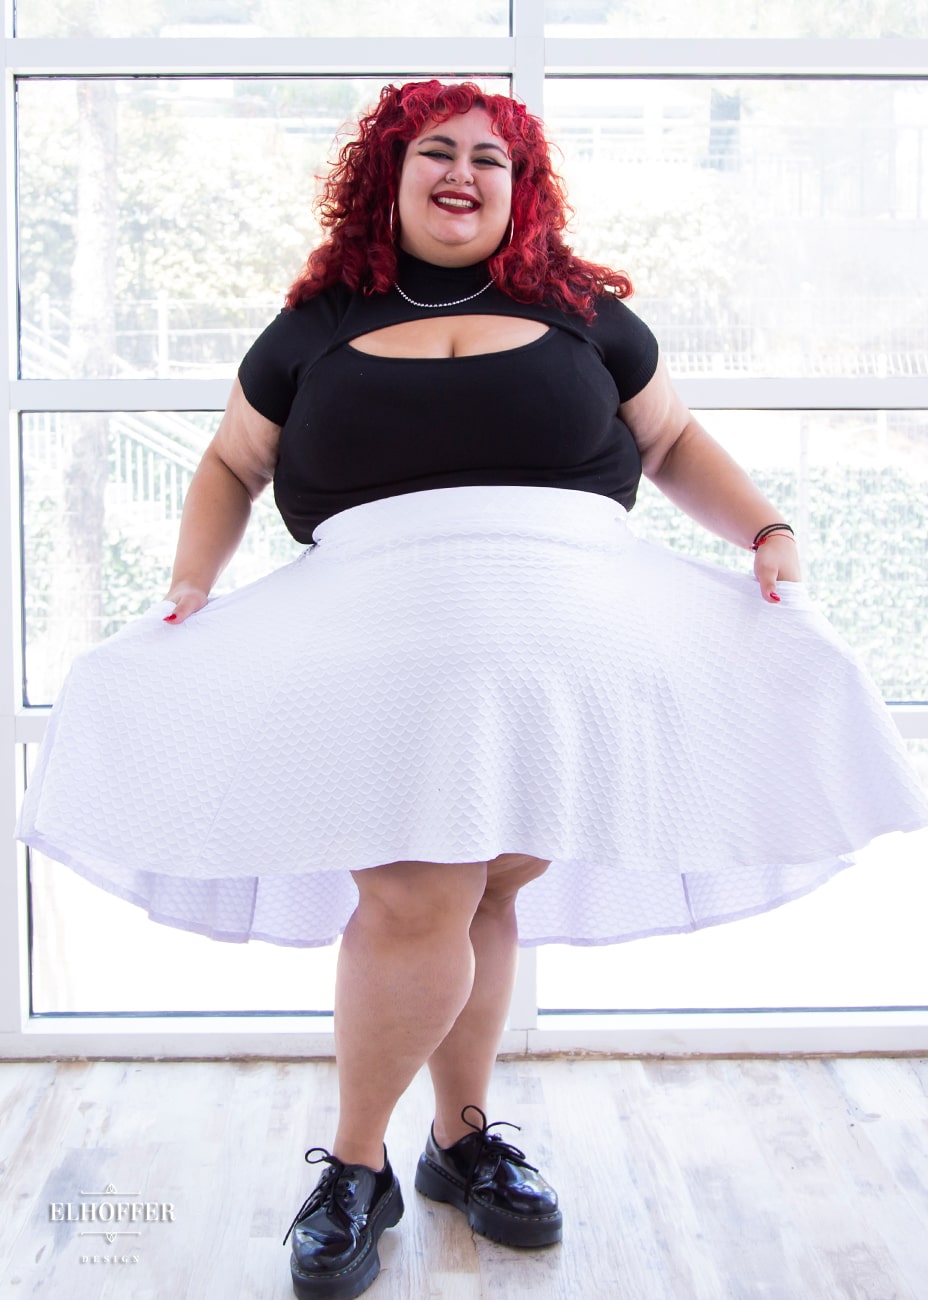 Victoria, an olive skinned size 4XL model with bright red curly hair,  is wearing a high low skirt that hits the back of her knees with a two inch elastic covered waistband. The skirt is white with a raised scale texture.